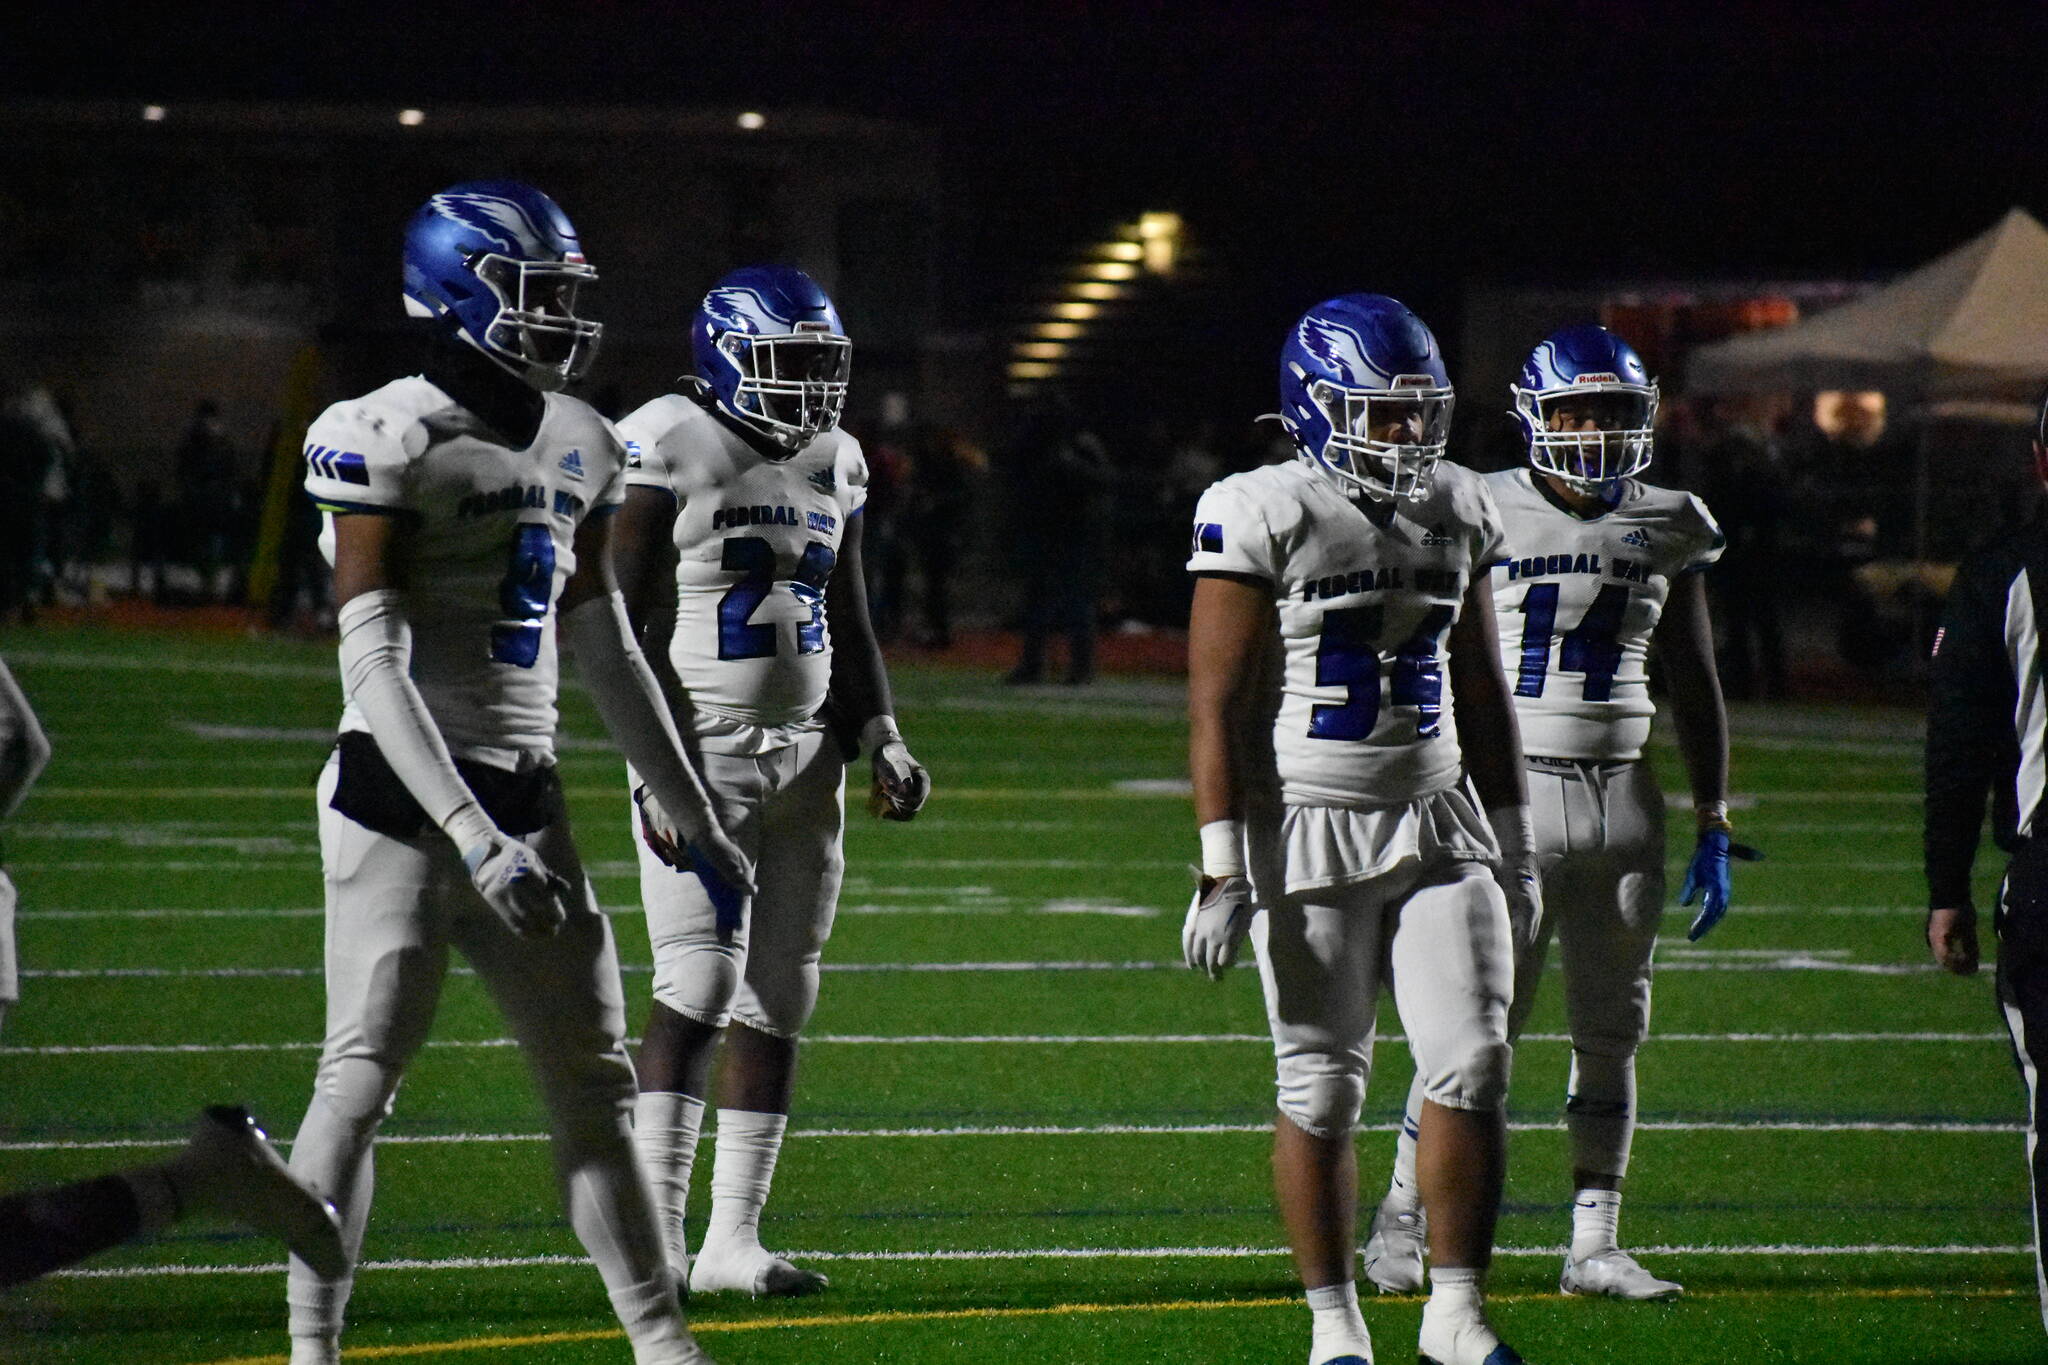 The Eagles defense looking to slow down the Spartans deep in their own end. Pictured: Tylin Jackson, Maki Piper, Khyse Faletogo, Keshawn Pham-Roberts. Photo by Ben Ray/the Mirror